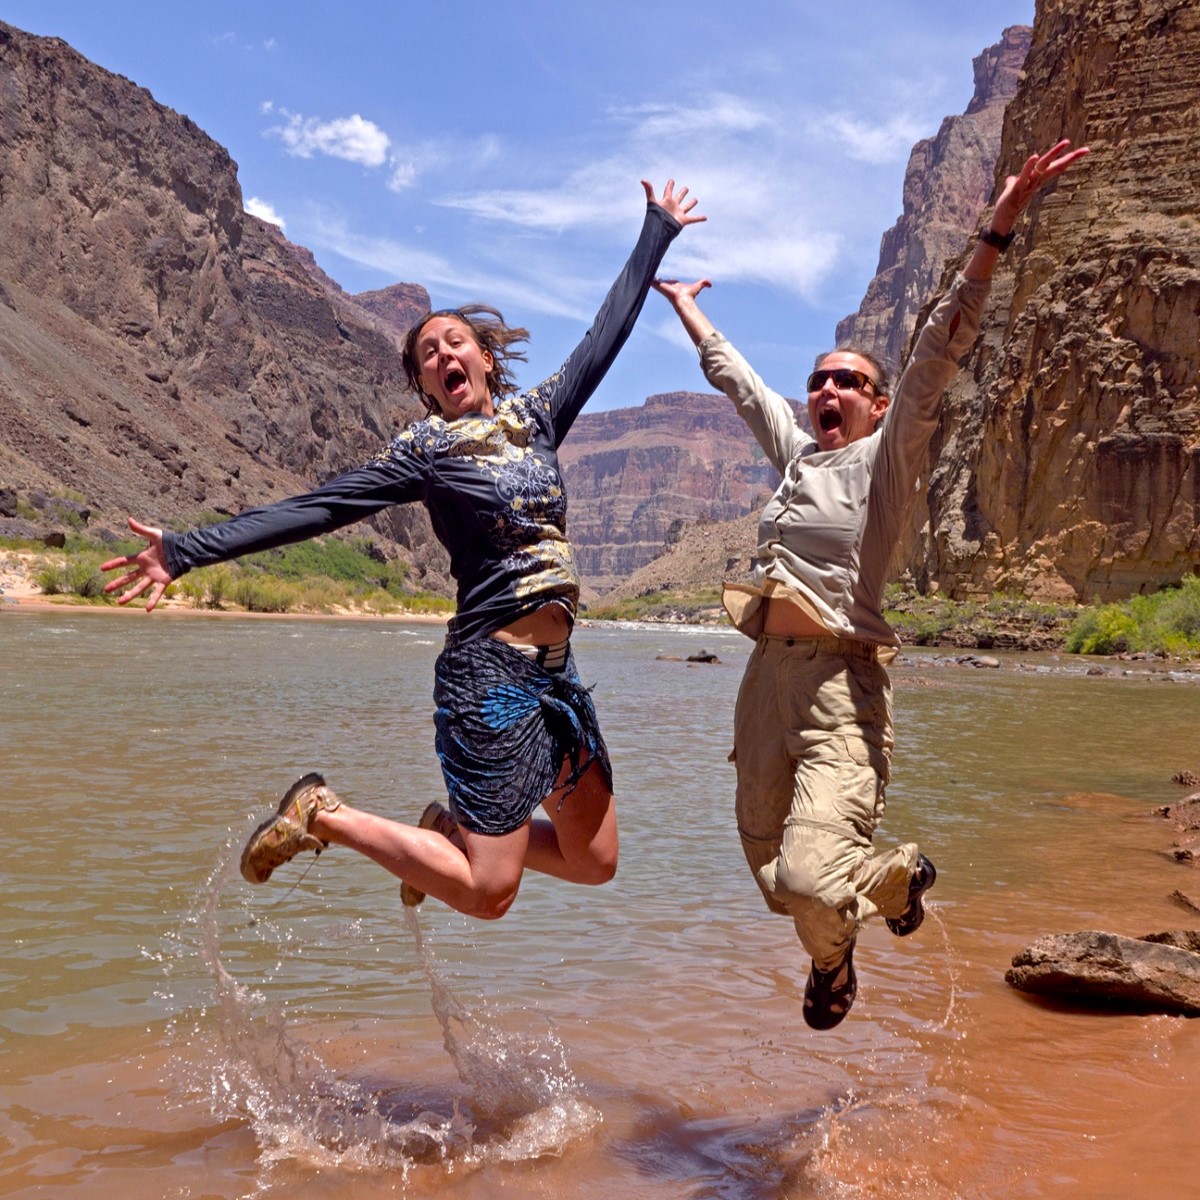 Two people jump for joy out of shallow water near the shore of the Colorado River during a sunny summer day